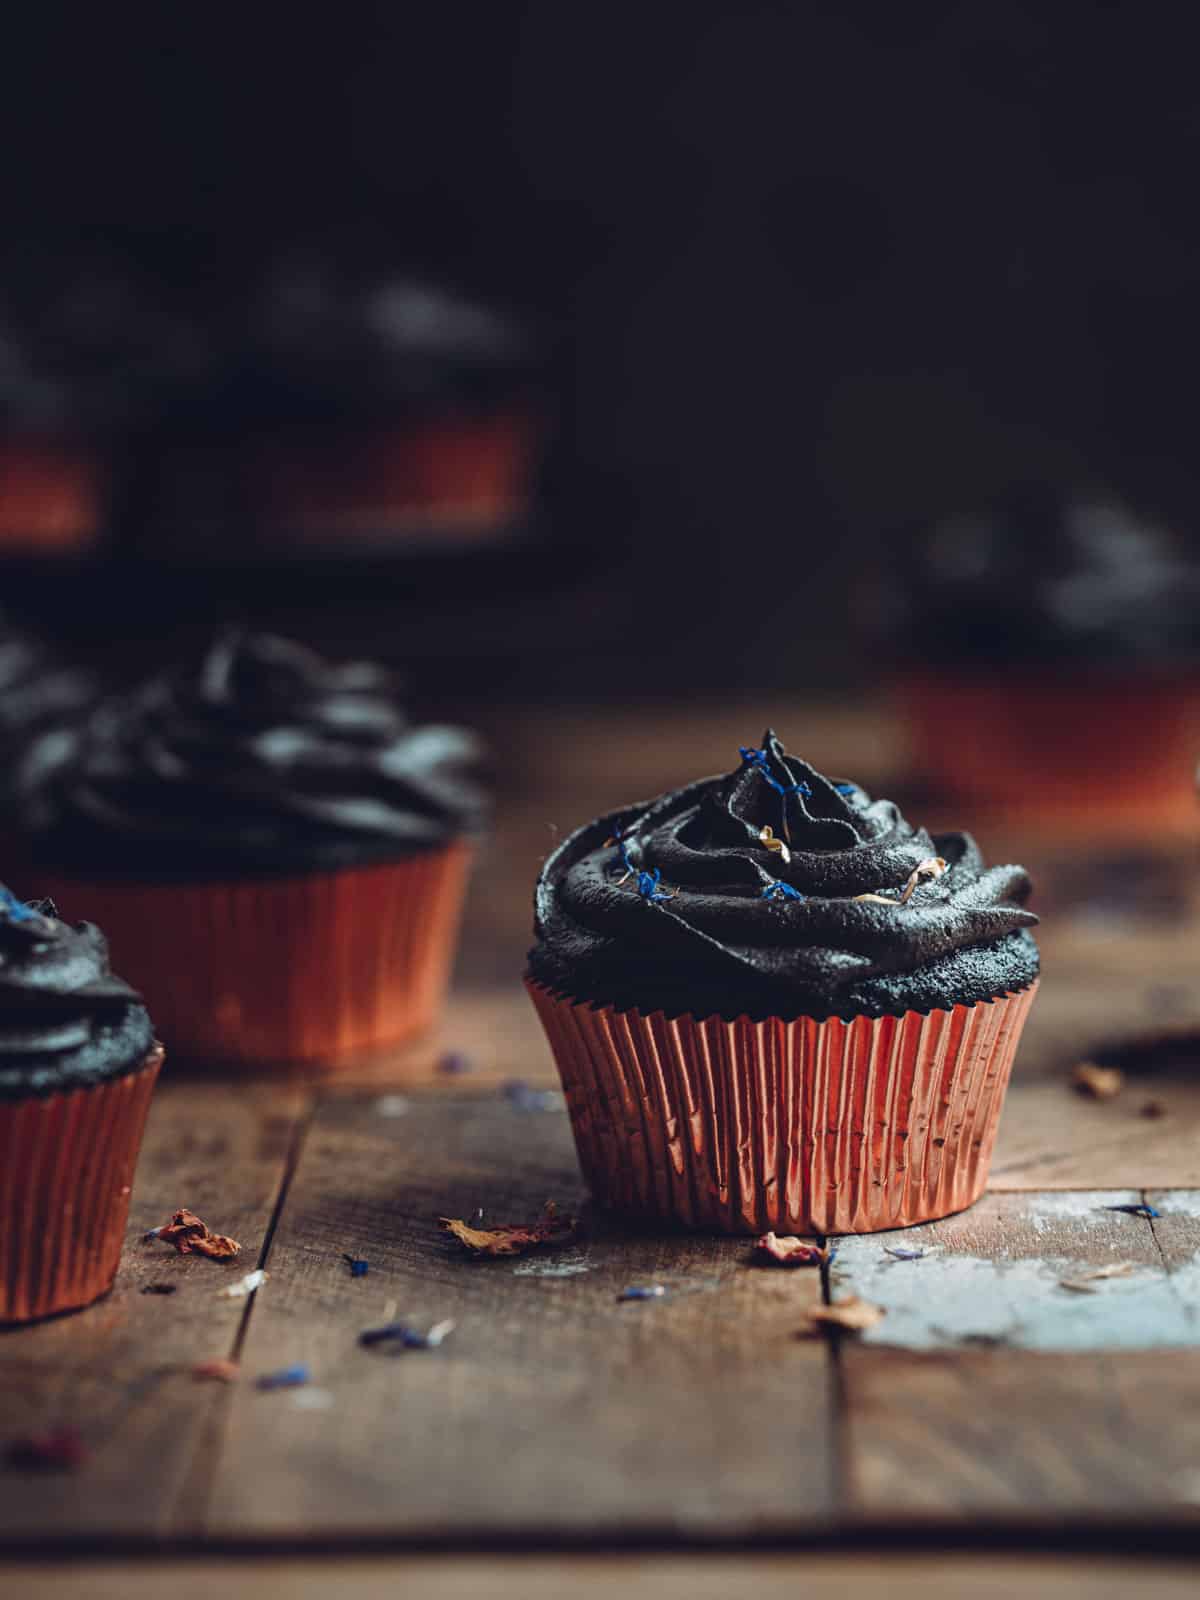 Black cupcakes in copper cake liners.